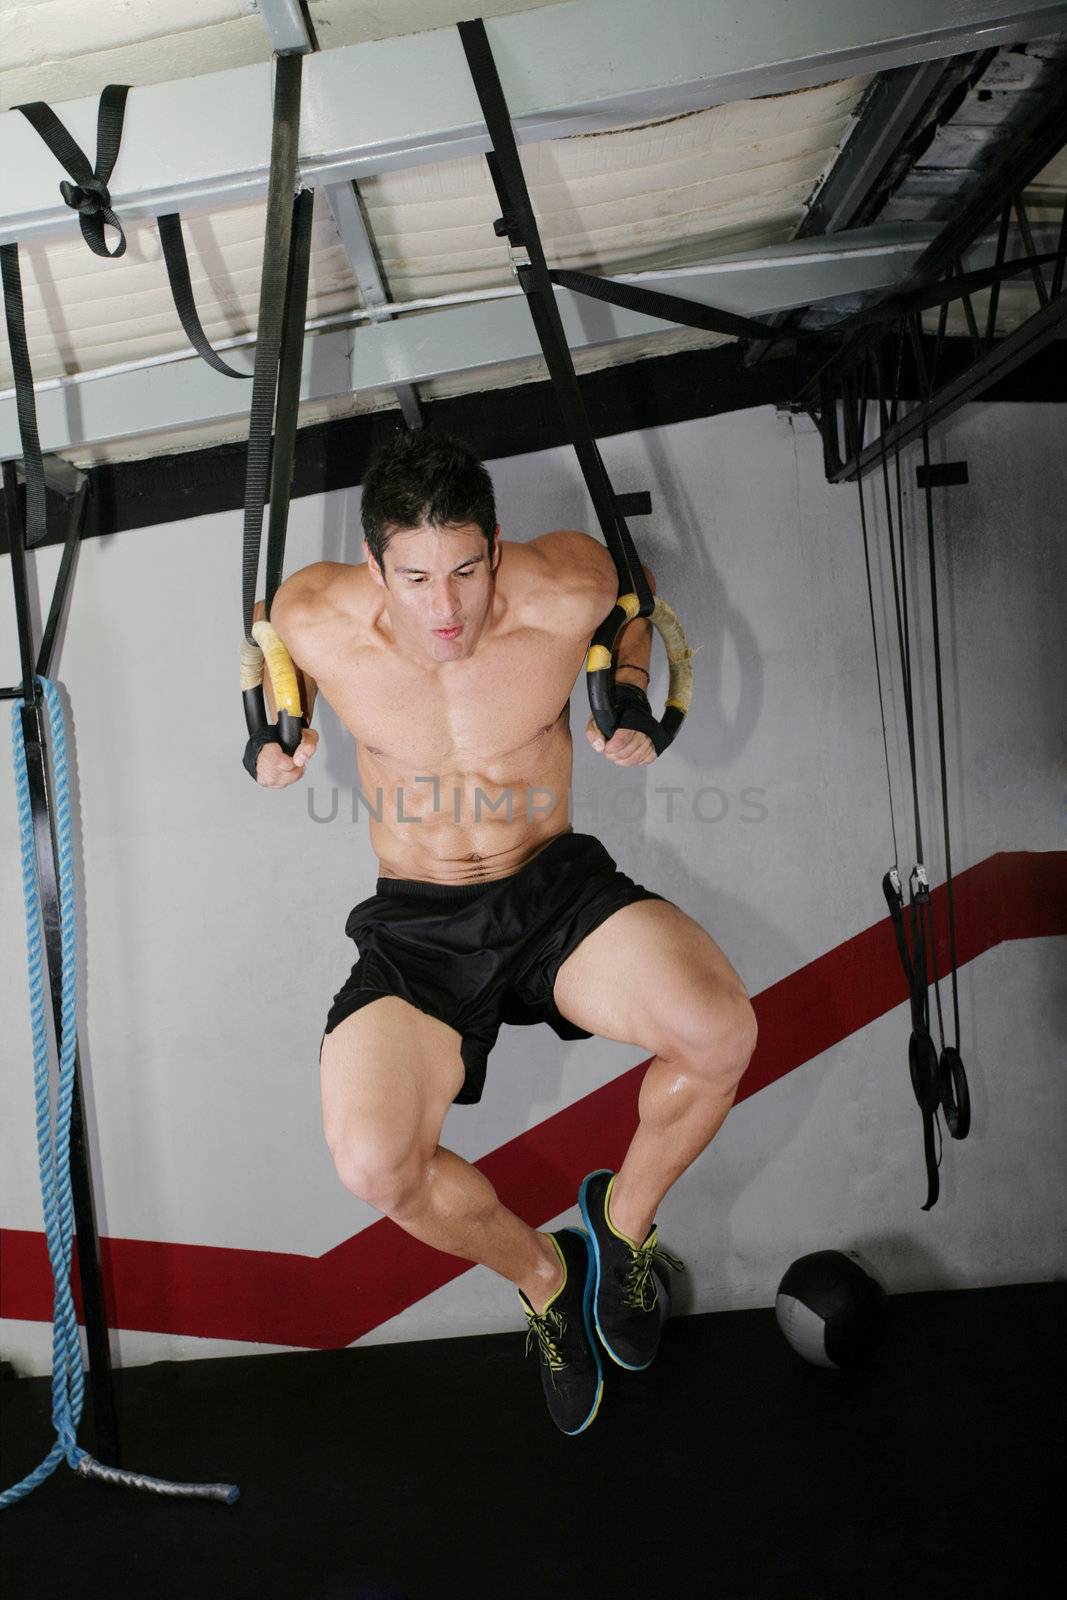 The sportsman the guy, carries out difficult exercise, sports gymnastics. Ring dip Crossfit exercise.